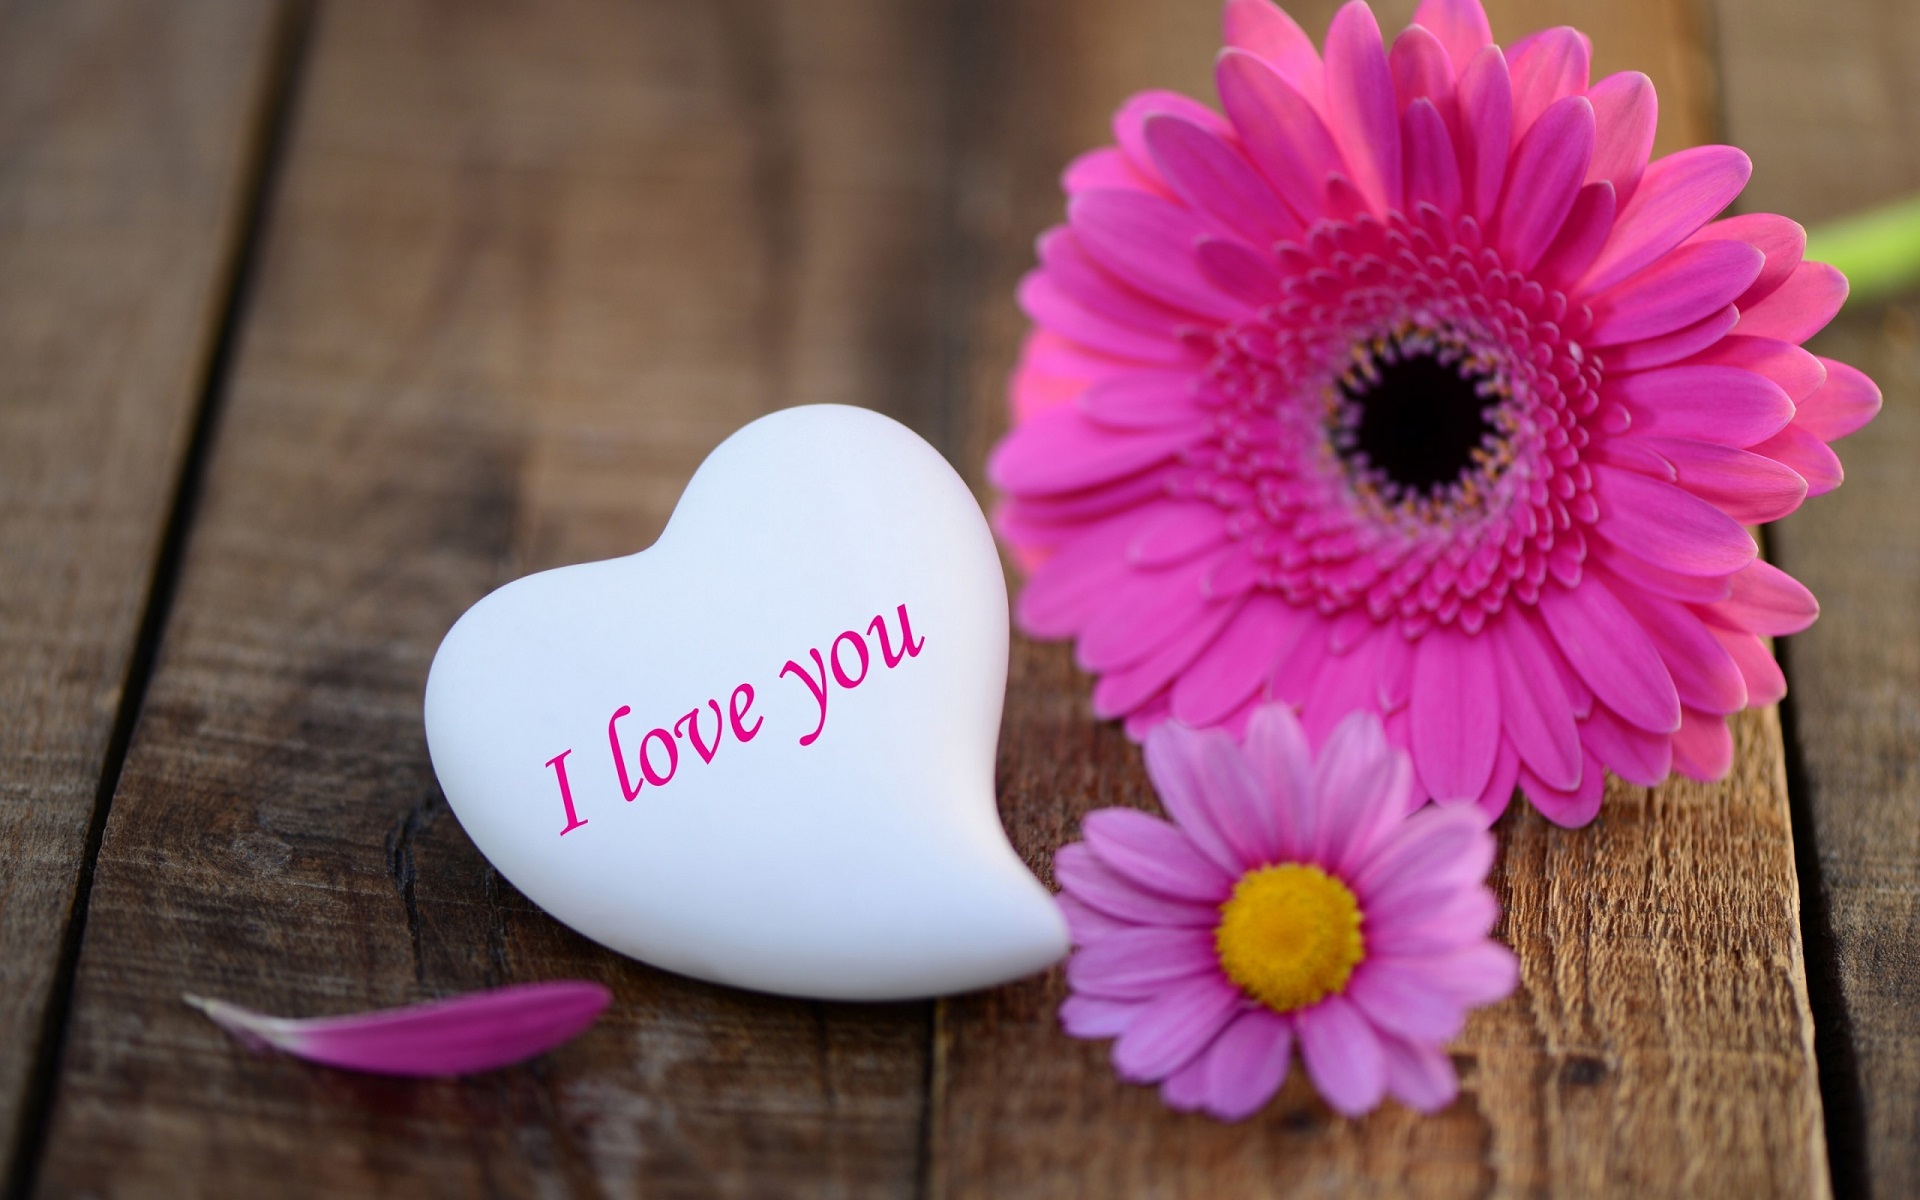 Beautiful I Love You Images hd pictures free download